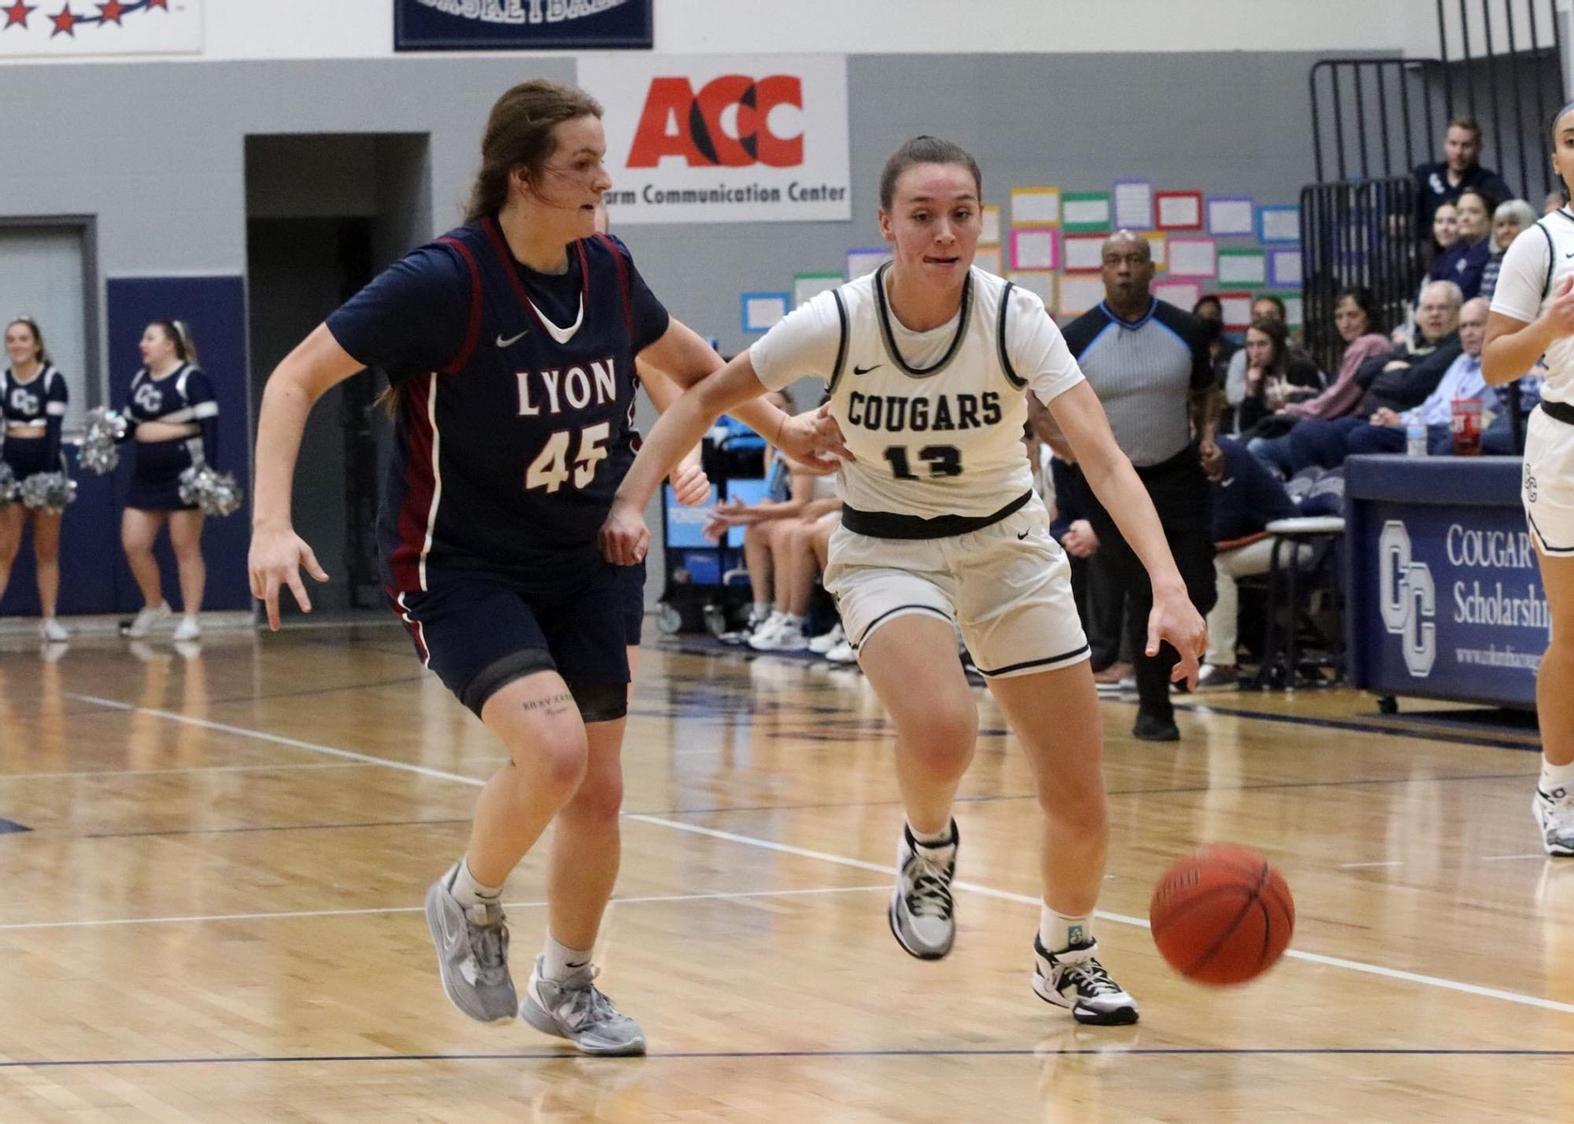 Lexi Miller drives to the bucket against Lyon